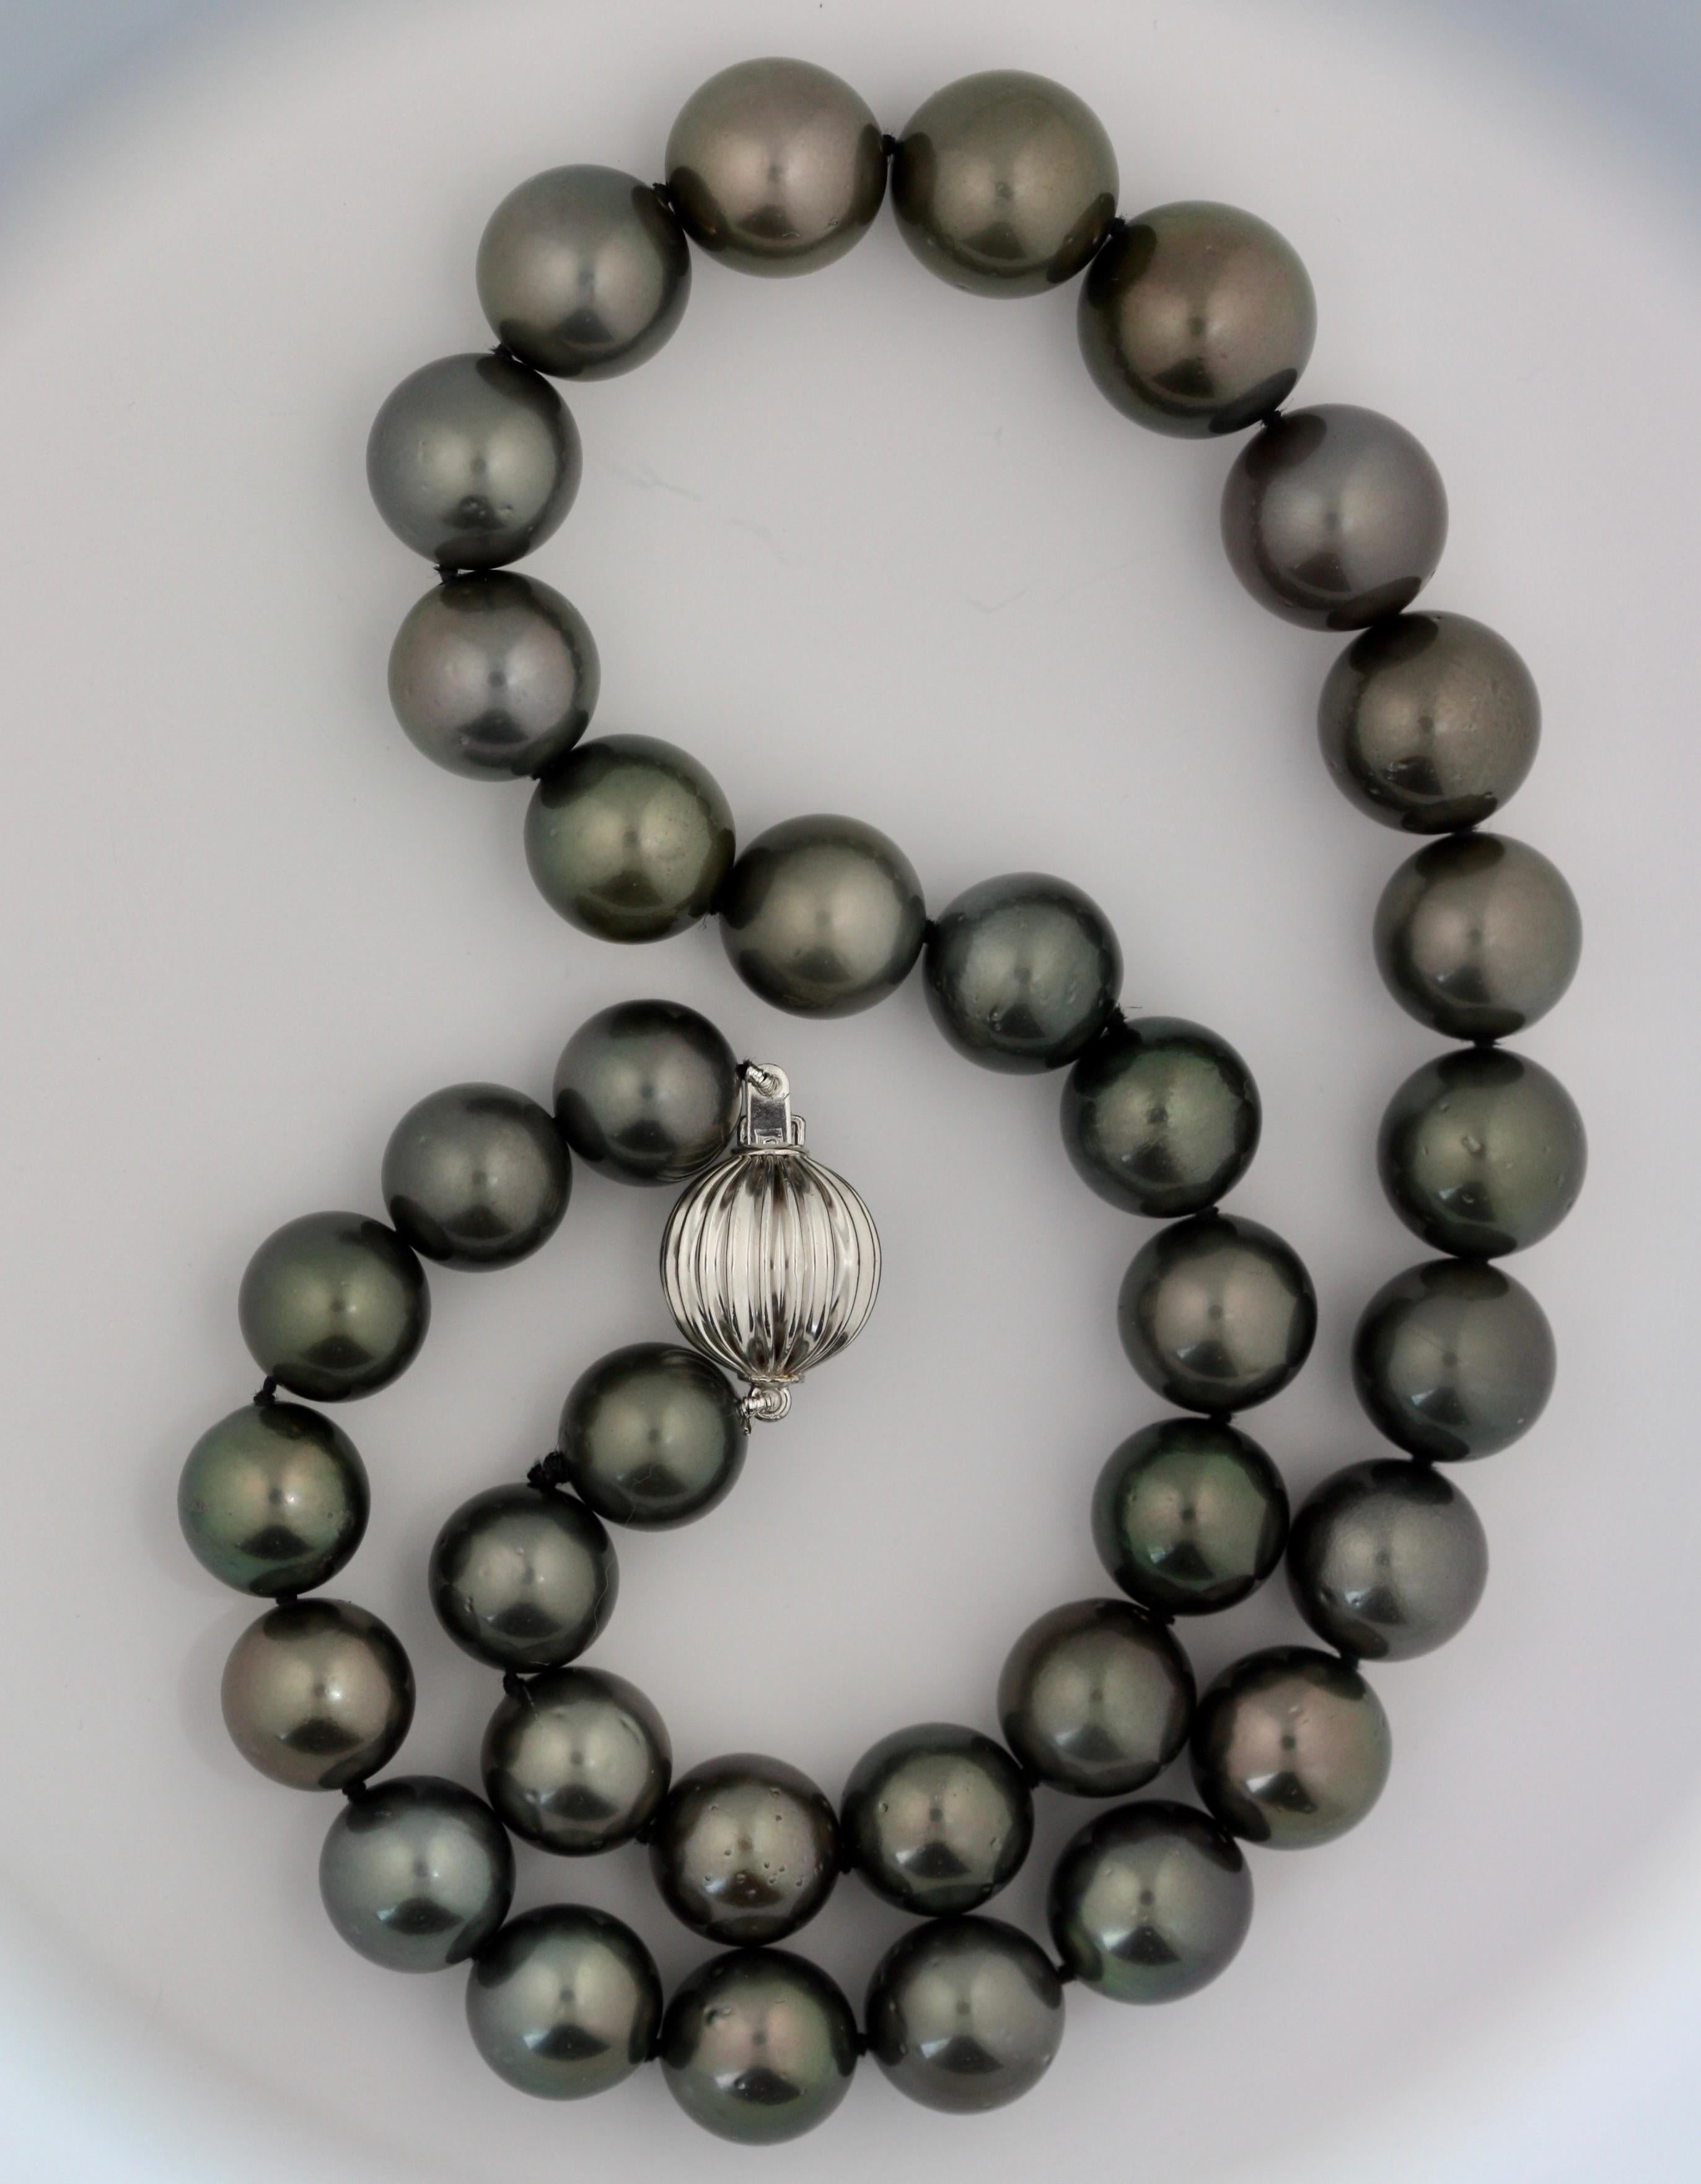 A CULTURED PEARL NECKLACE
the single strand composed of thirty-five Tahitian pearls measuring approximately 11mm to 14mm in diameter, completed by a 14 carat white gold ball clasp